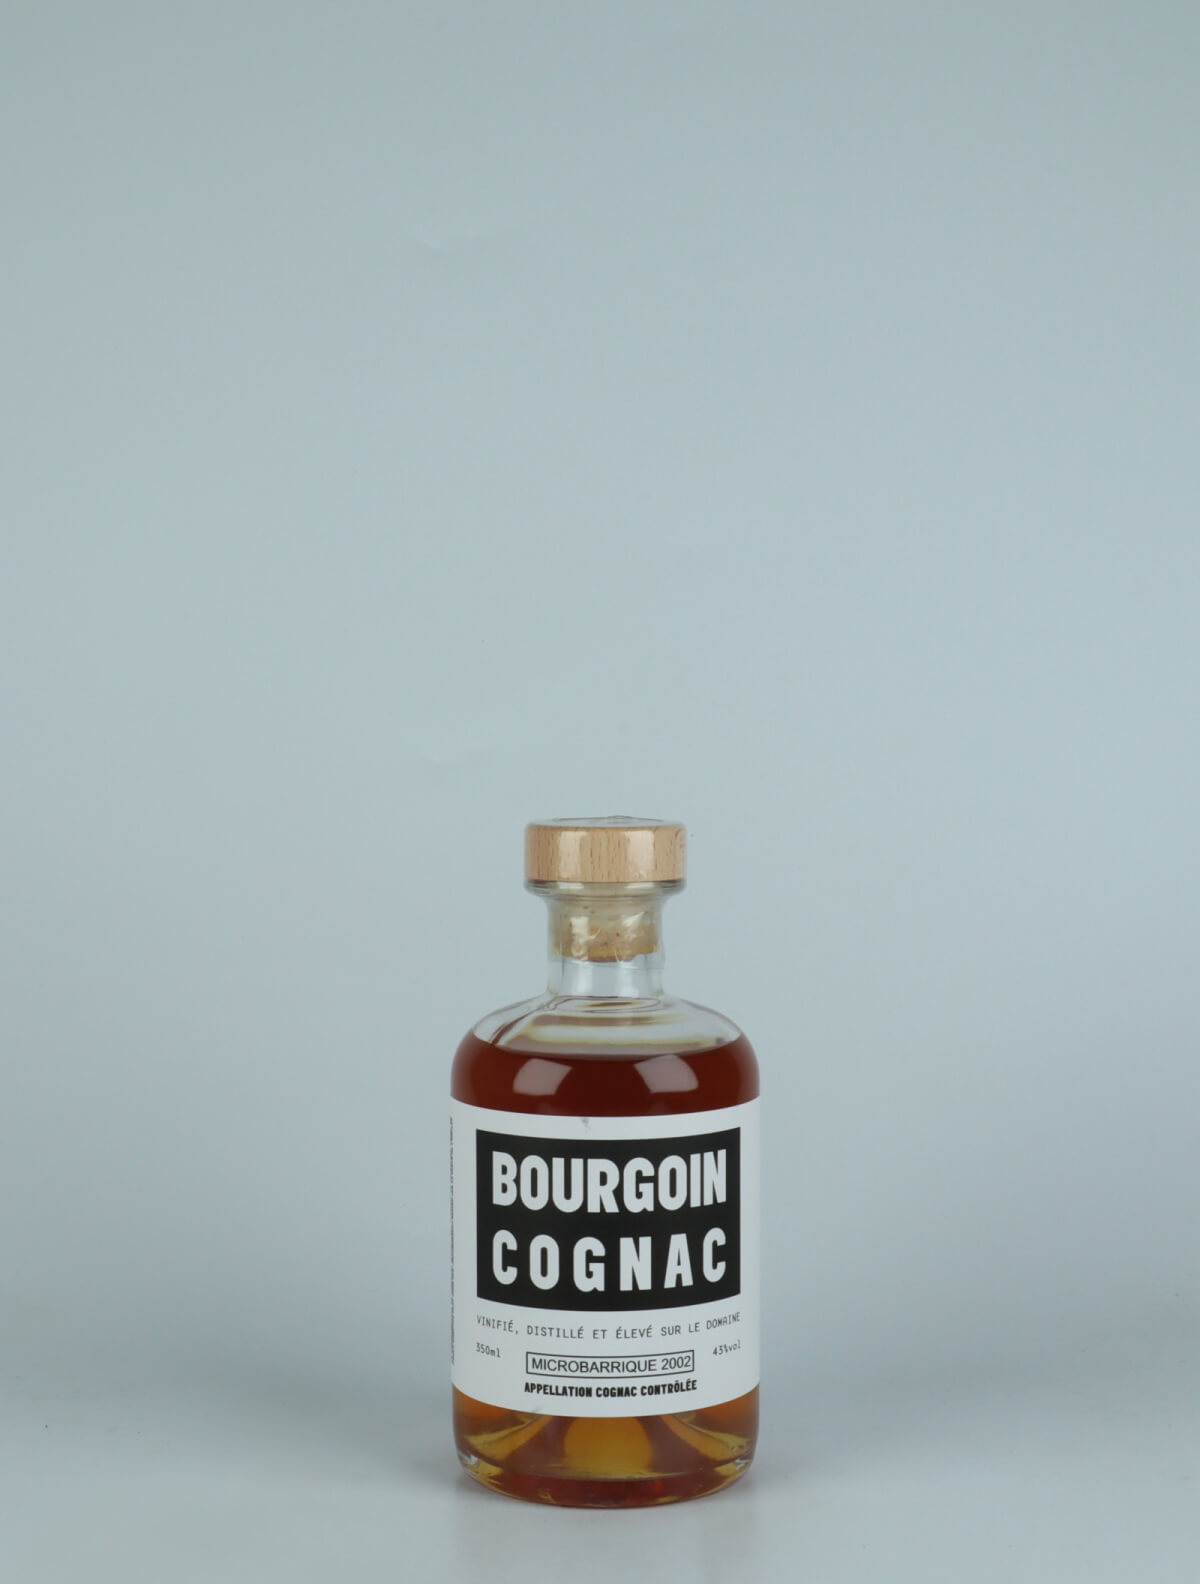 A bottle N.V. Cognac XO - Microbarrique (2002) - 20 Years Old Spirits from Bourgoin Cognac, Cognac in France